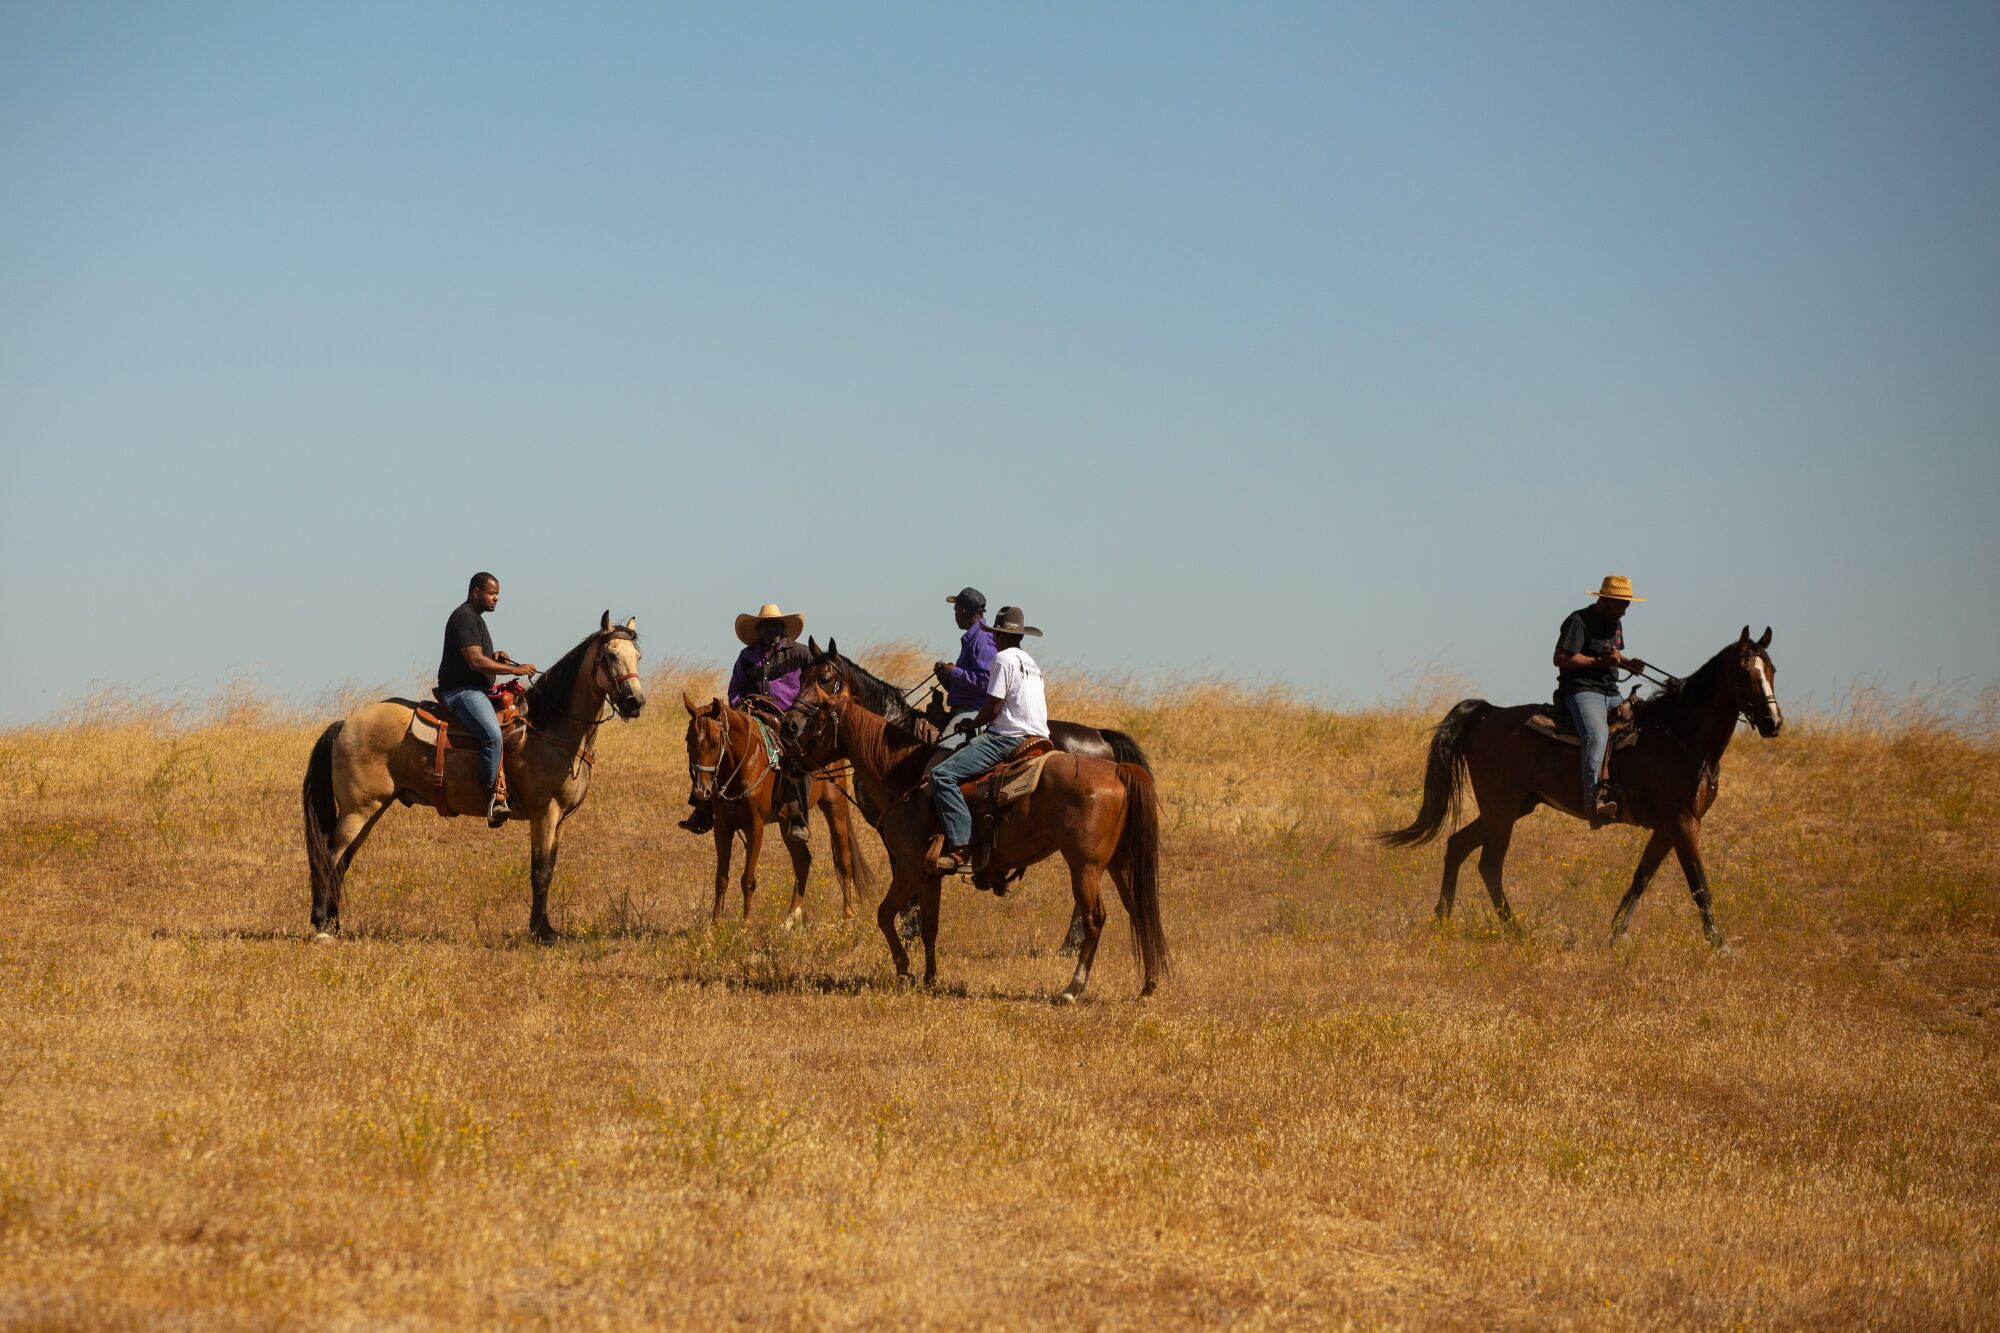 Several riders on horses in the distance gathering in the dried grass on a hill